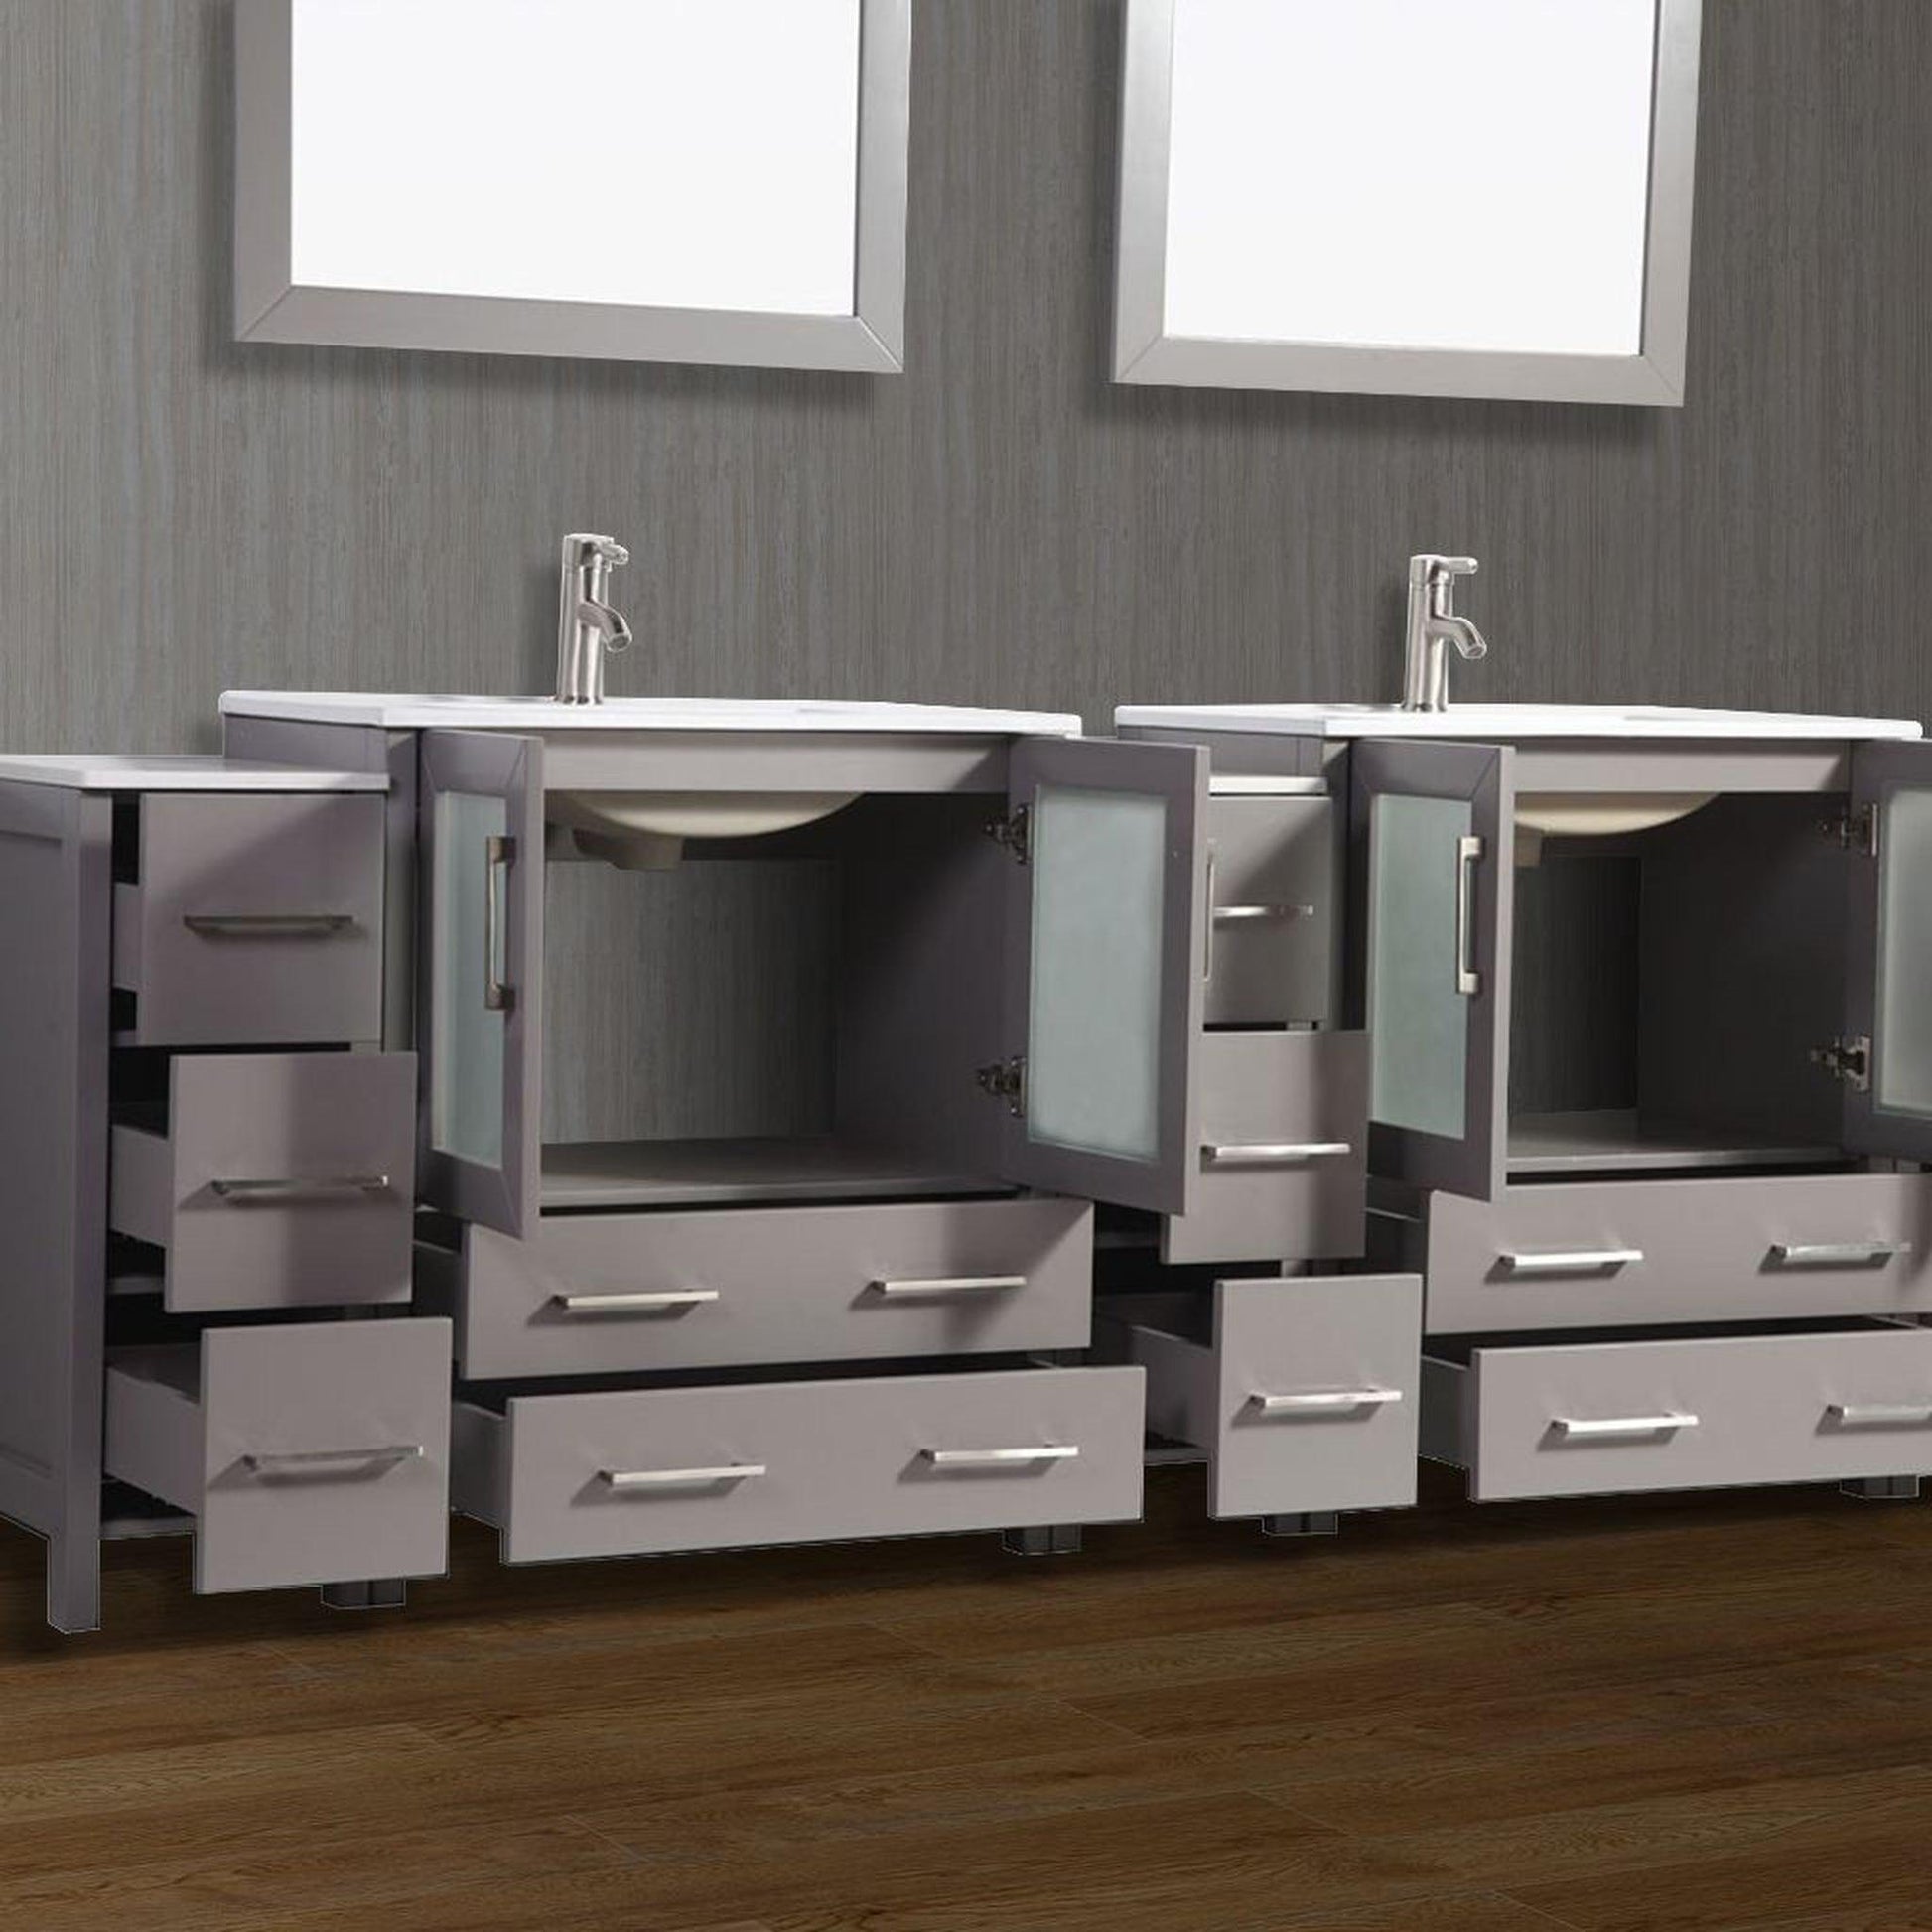 Vanity Art VA30 72" Double Gray Freestanding Modern Bathroom Vanity Set With Integrated Ceramic Sink, Compact 2 Shelves, 7 Dovetail Drawers Cabinet and 2 Mirrors